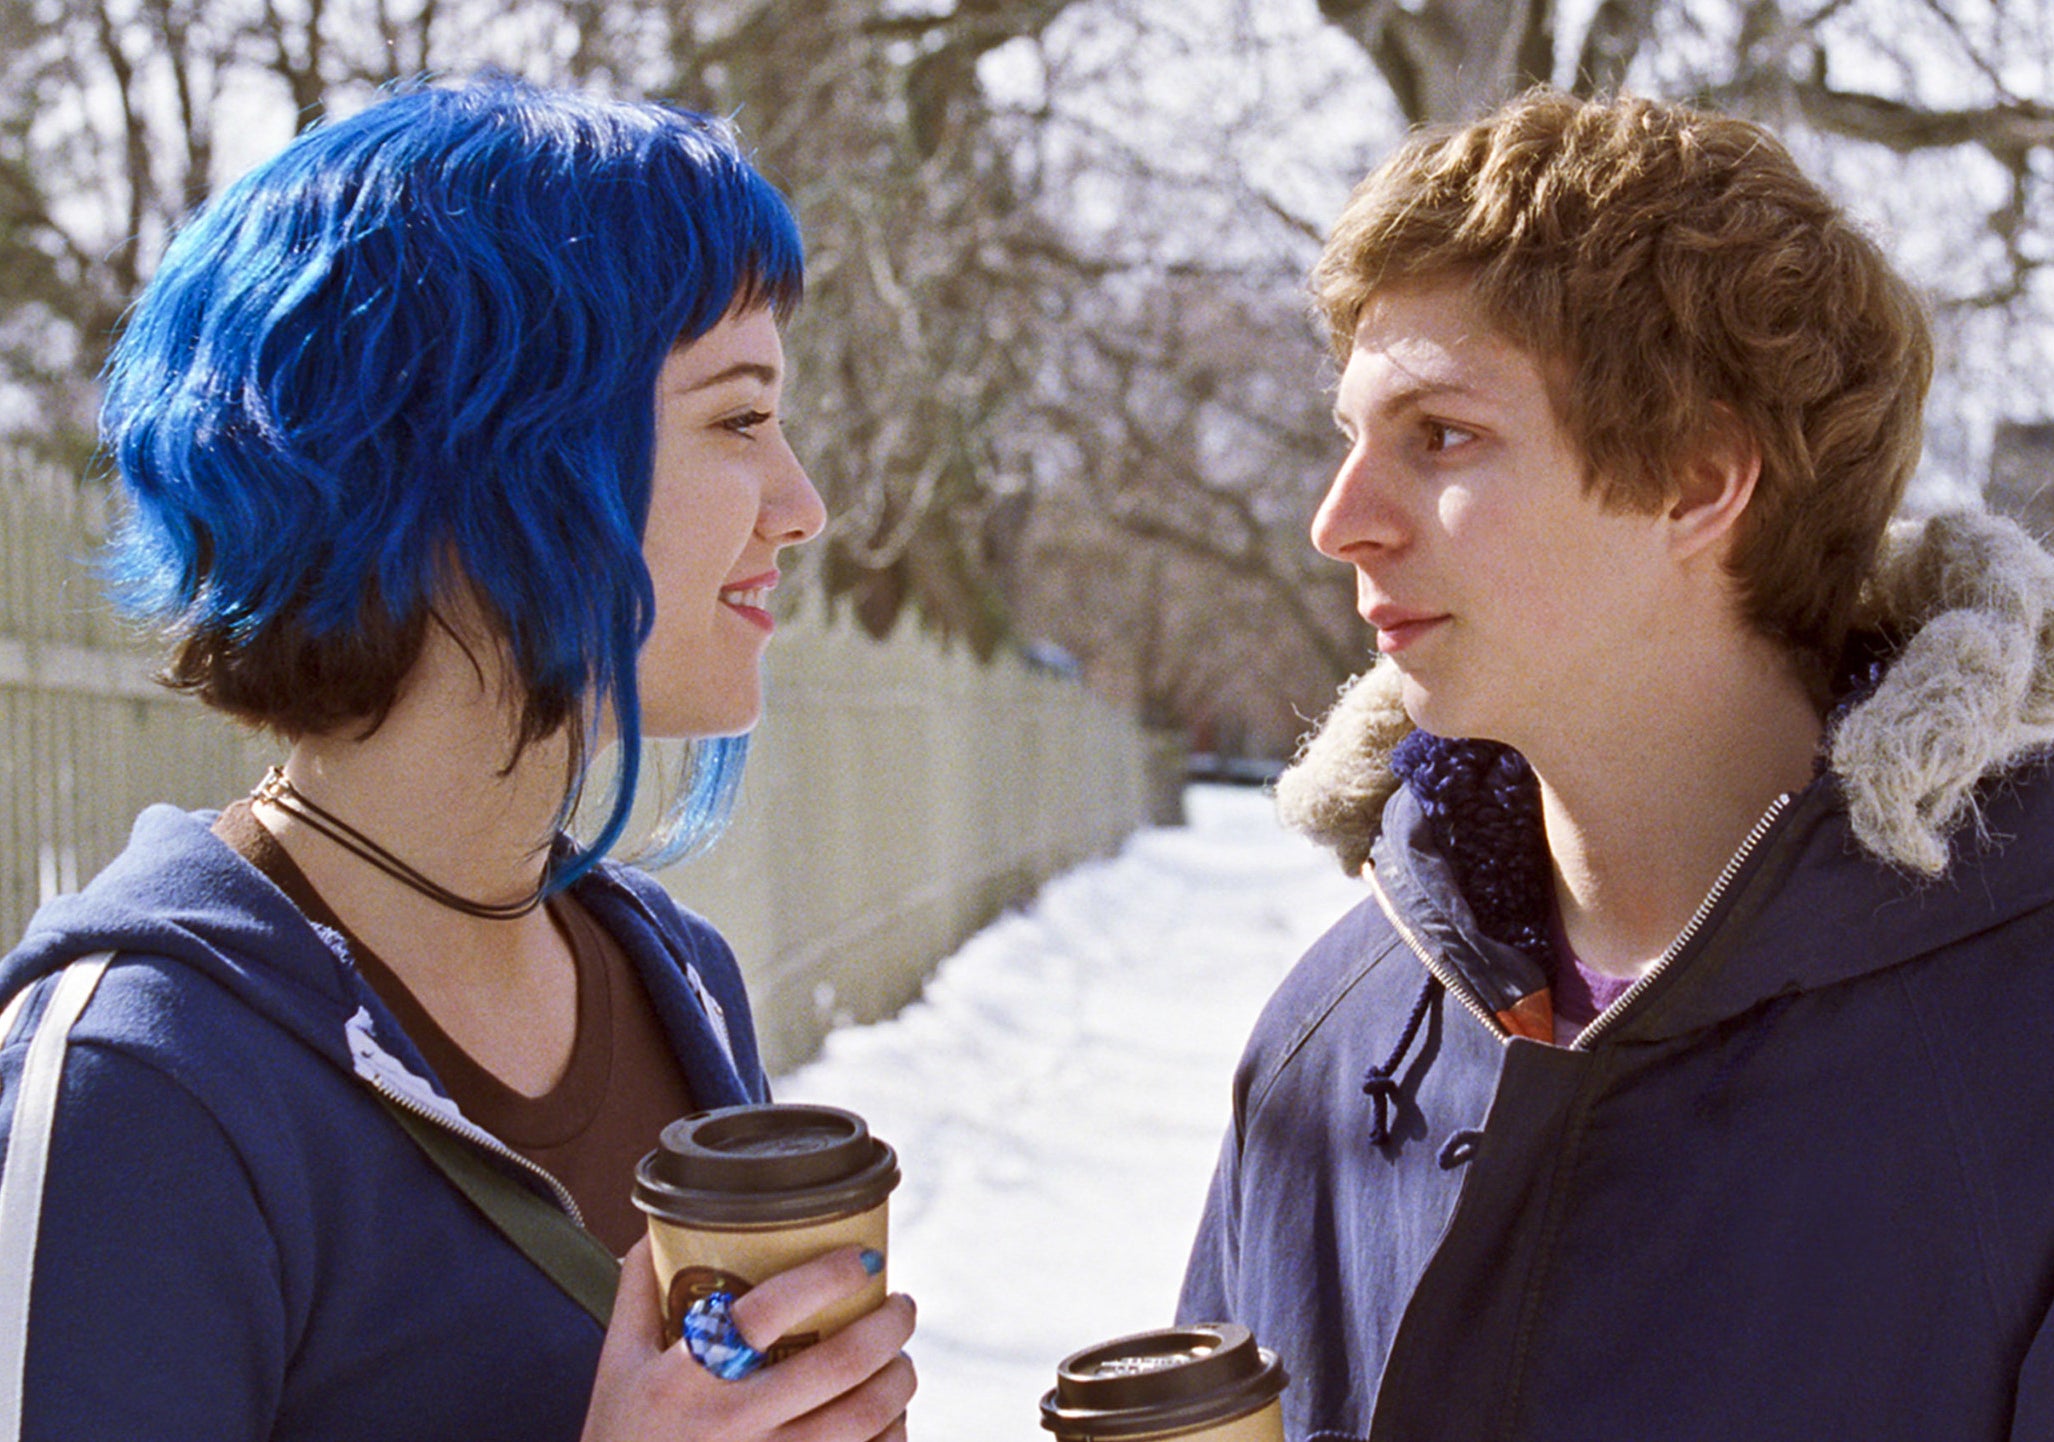 mary elizabeth winstead as Ramona flowers in scott pilgrim vs. the world with dark blue hair with dark brown by the nape of her neck and who longer strands of blue hair framing her face